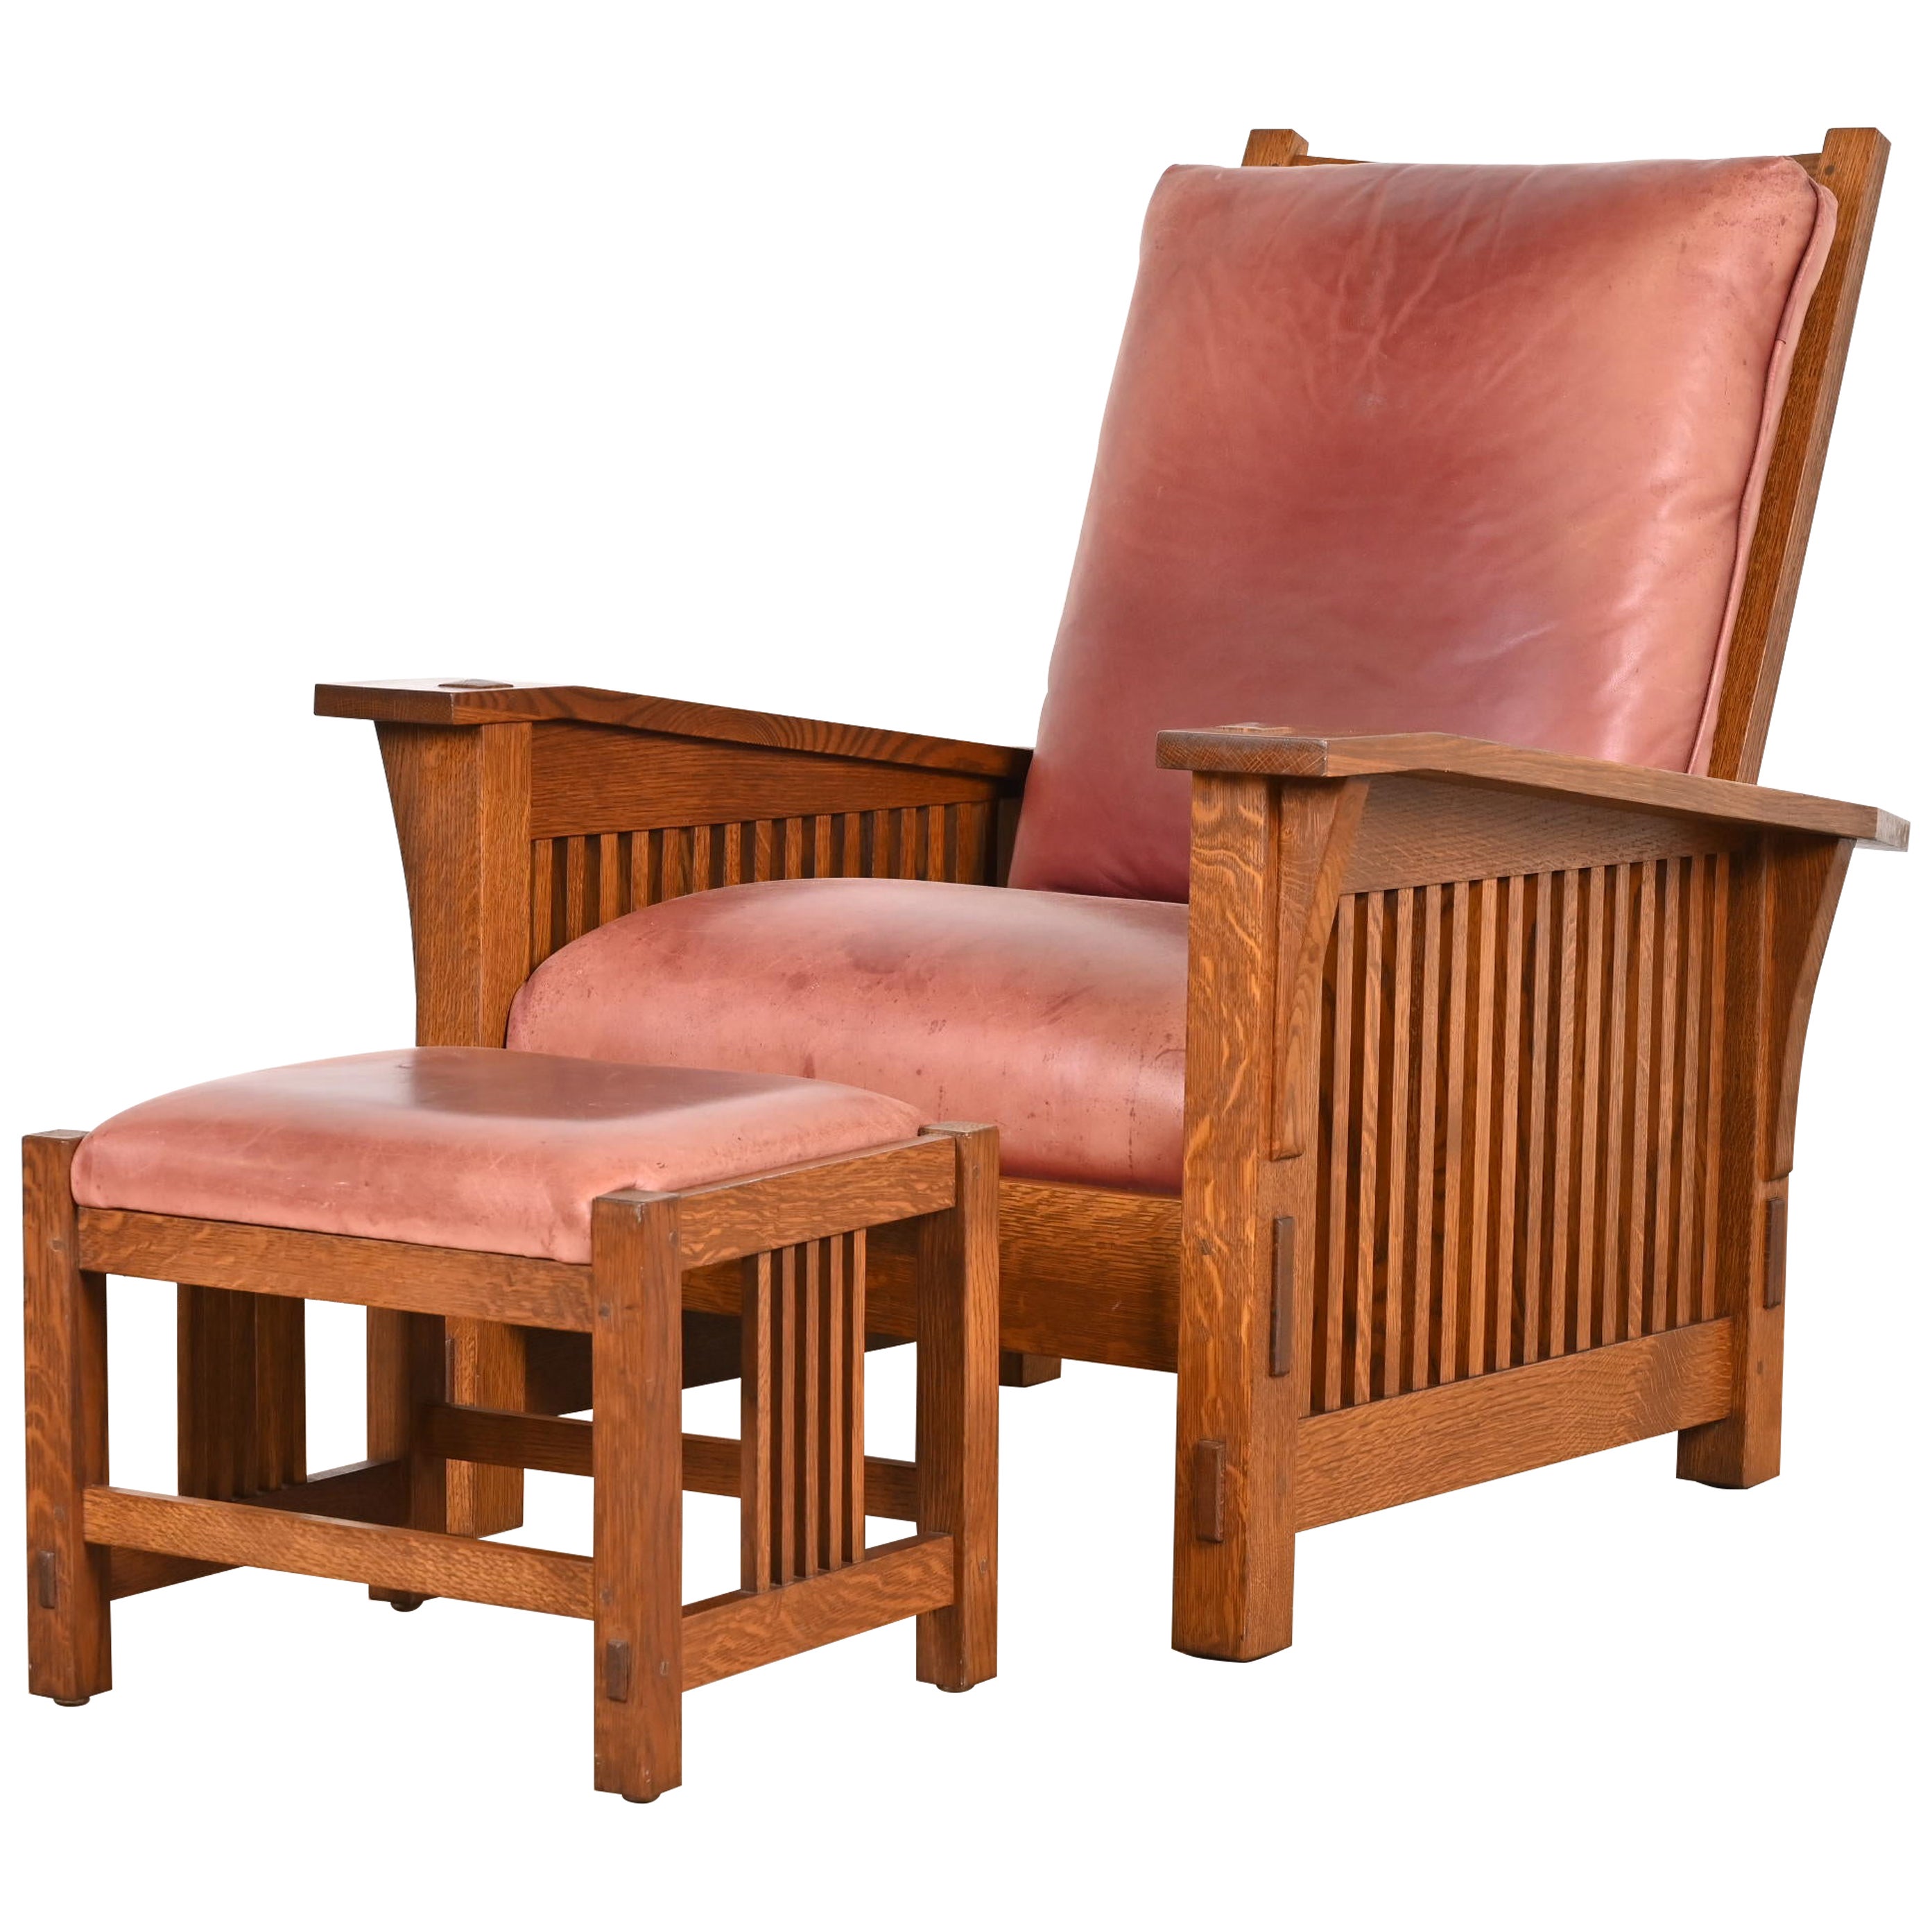 Stickley Mission Arts & Crafts Oak and Leather Morris Chair With Ottoman